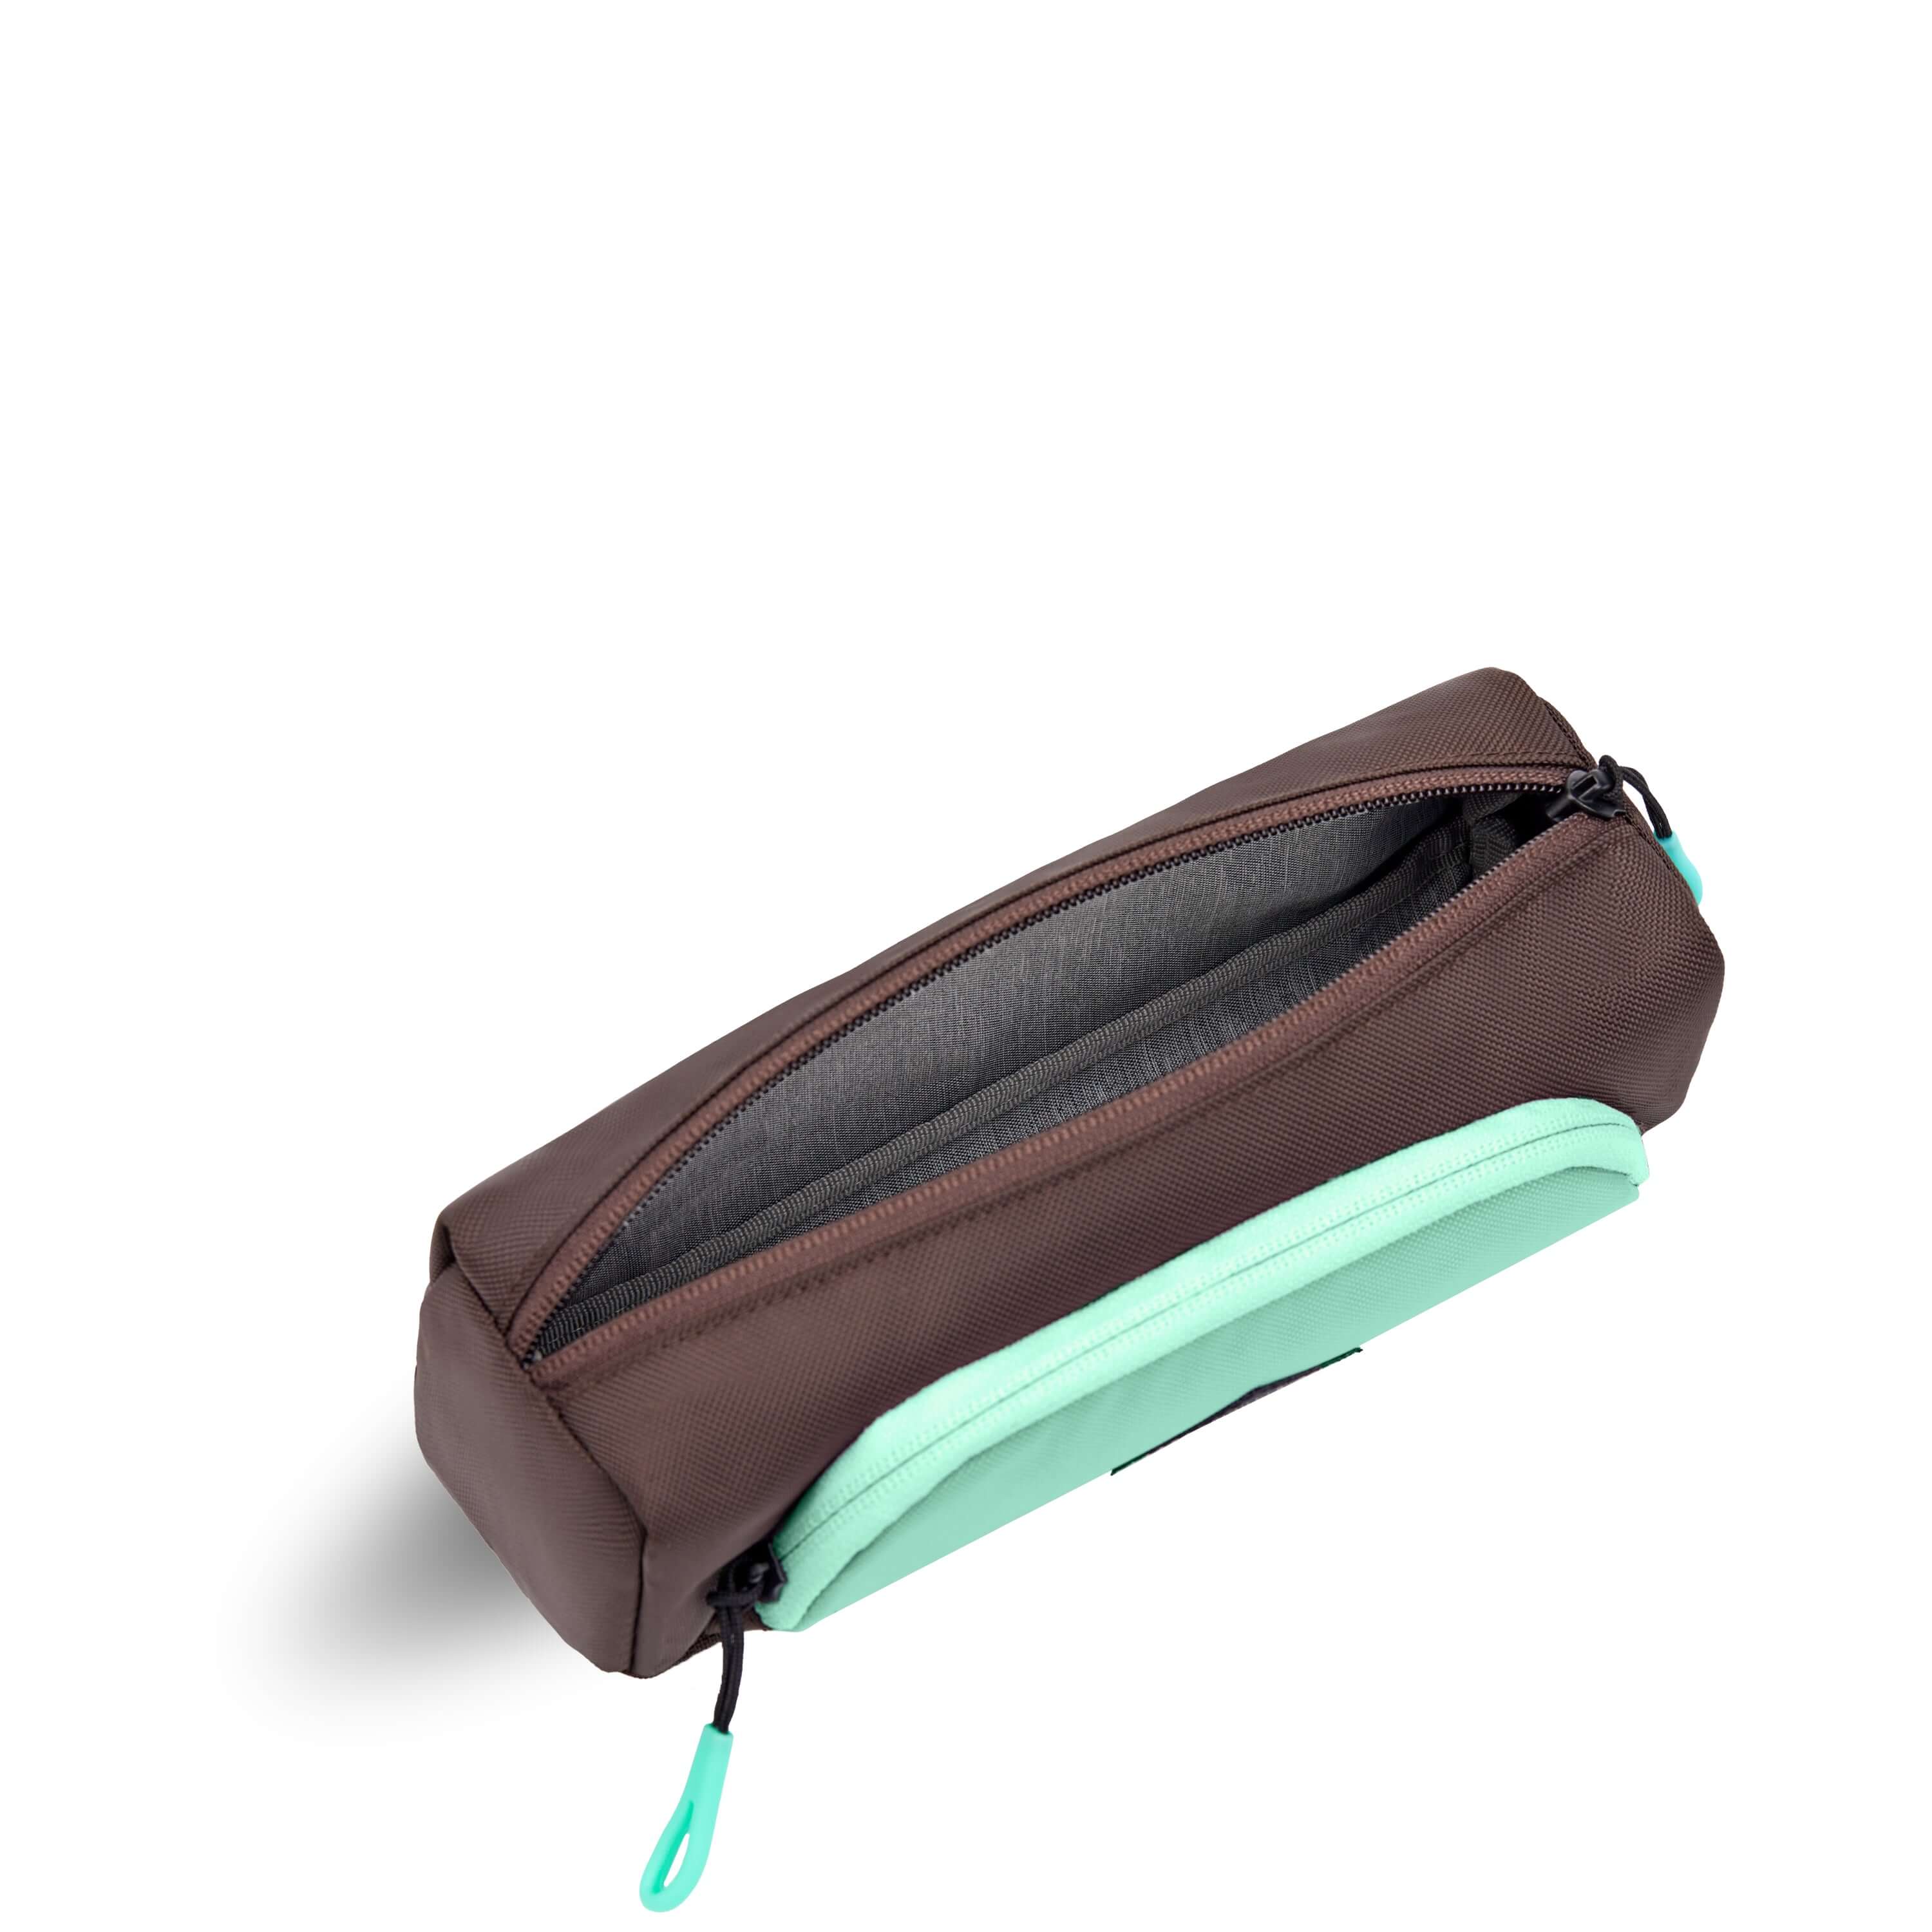 Top view of Sherpani travel accessory, the Poet in Seagreen. The pouch is unzipped to reveal a light gray interior.